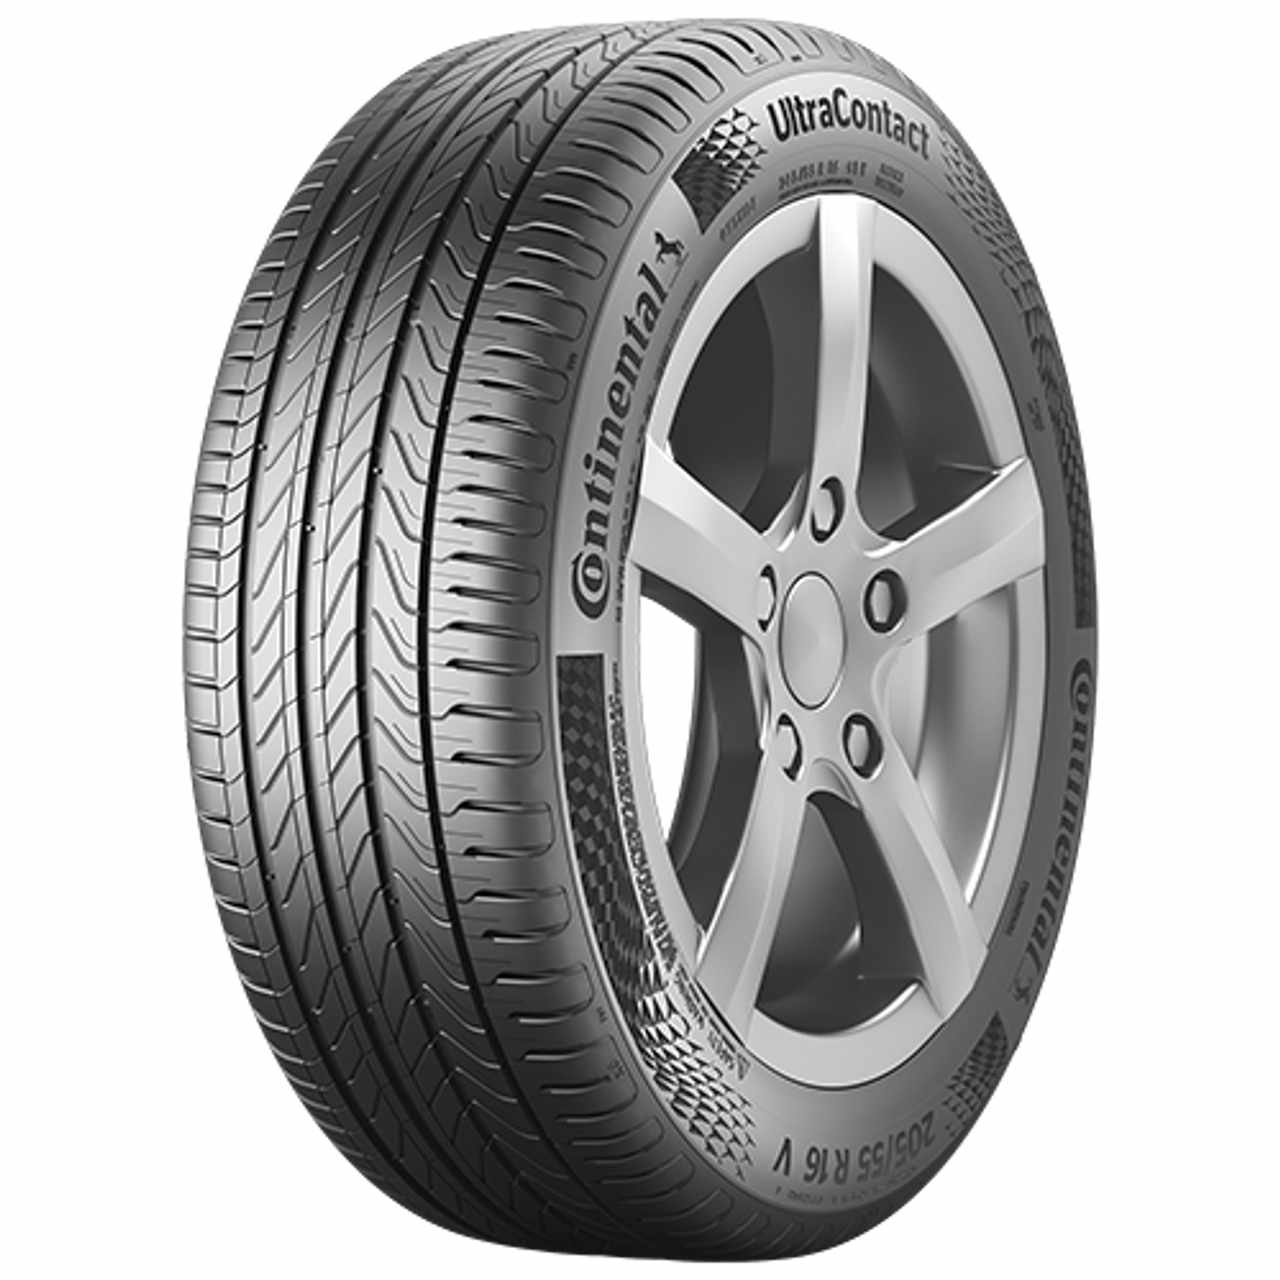 CONTINENTAL ULTRACONTACT (EVc) 185/55R15 82H BSW